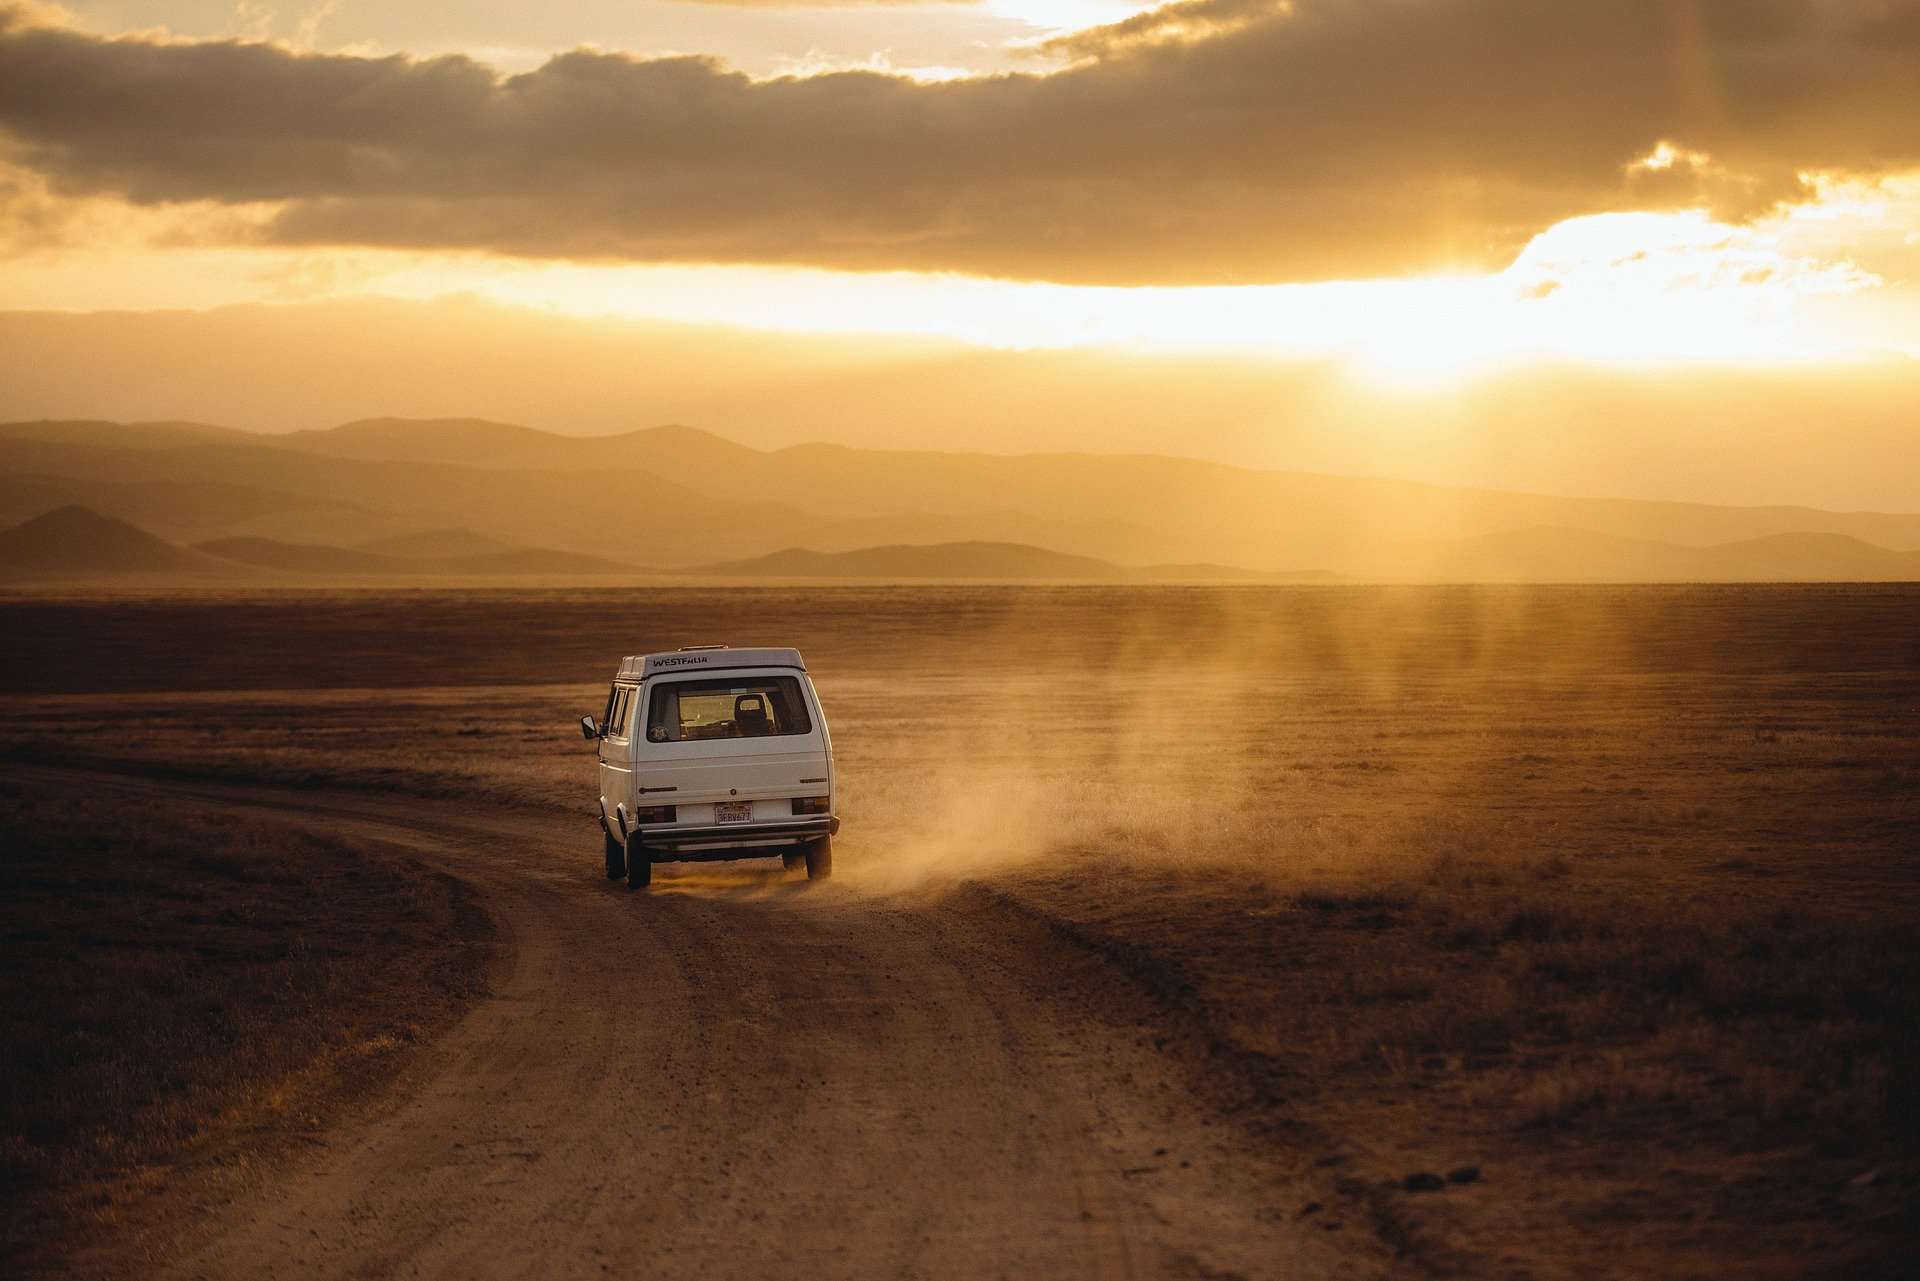 What to bring on a road trip - packing checklist PDF - van through the dust